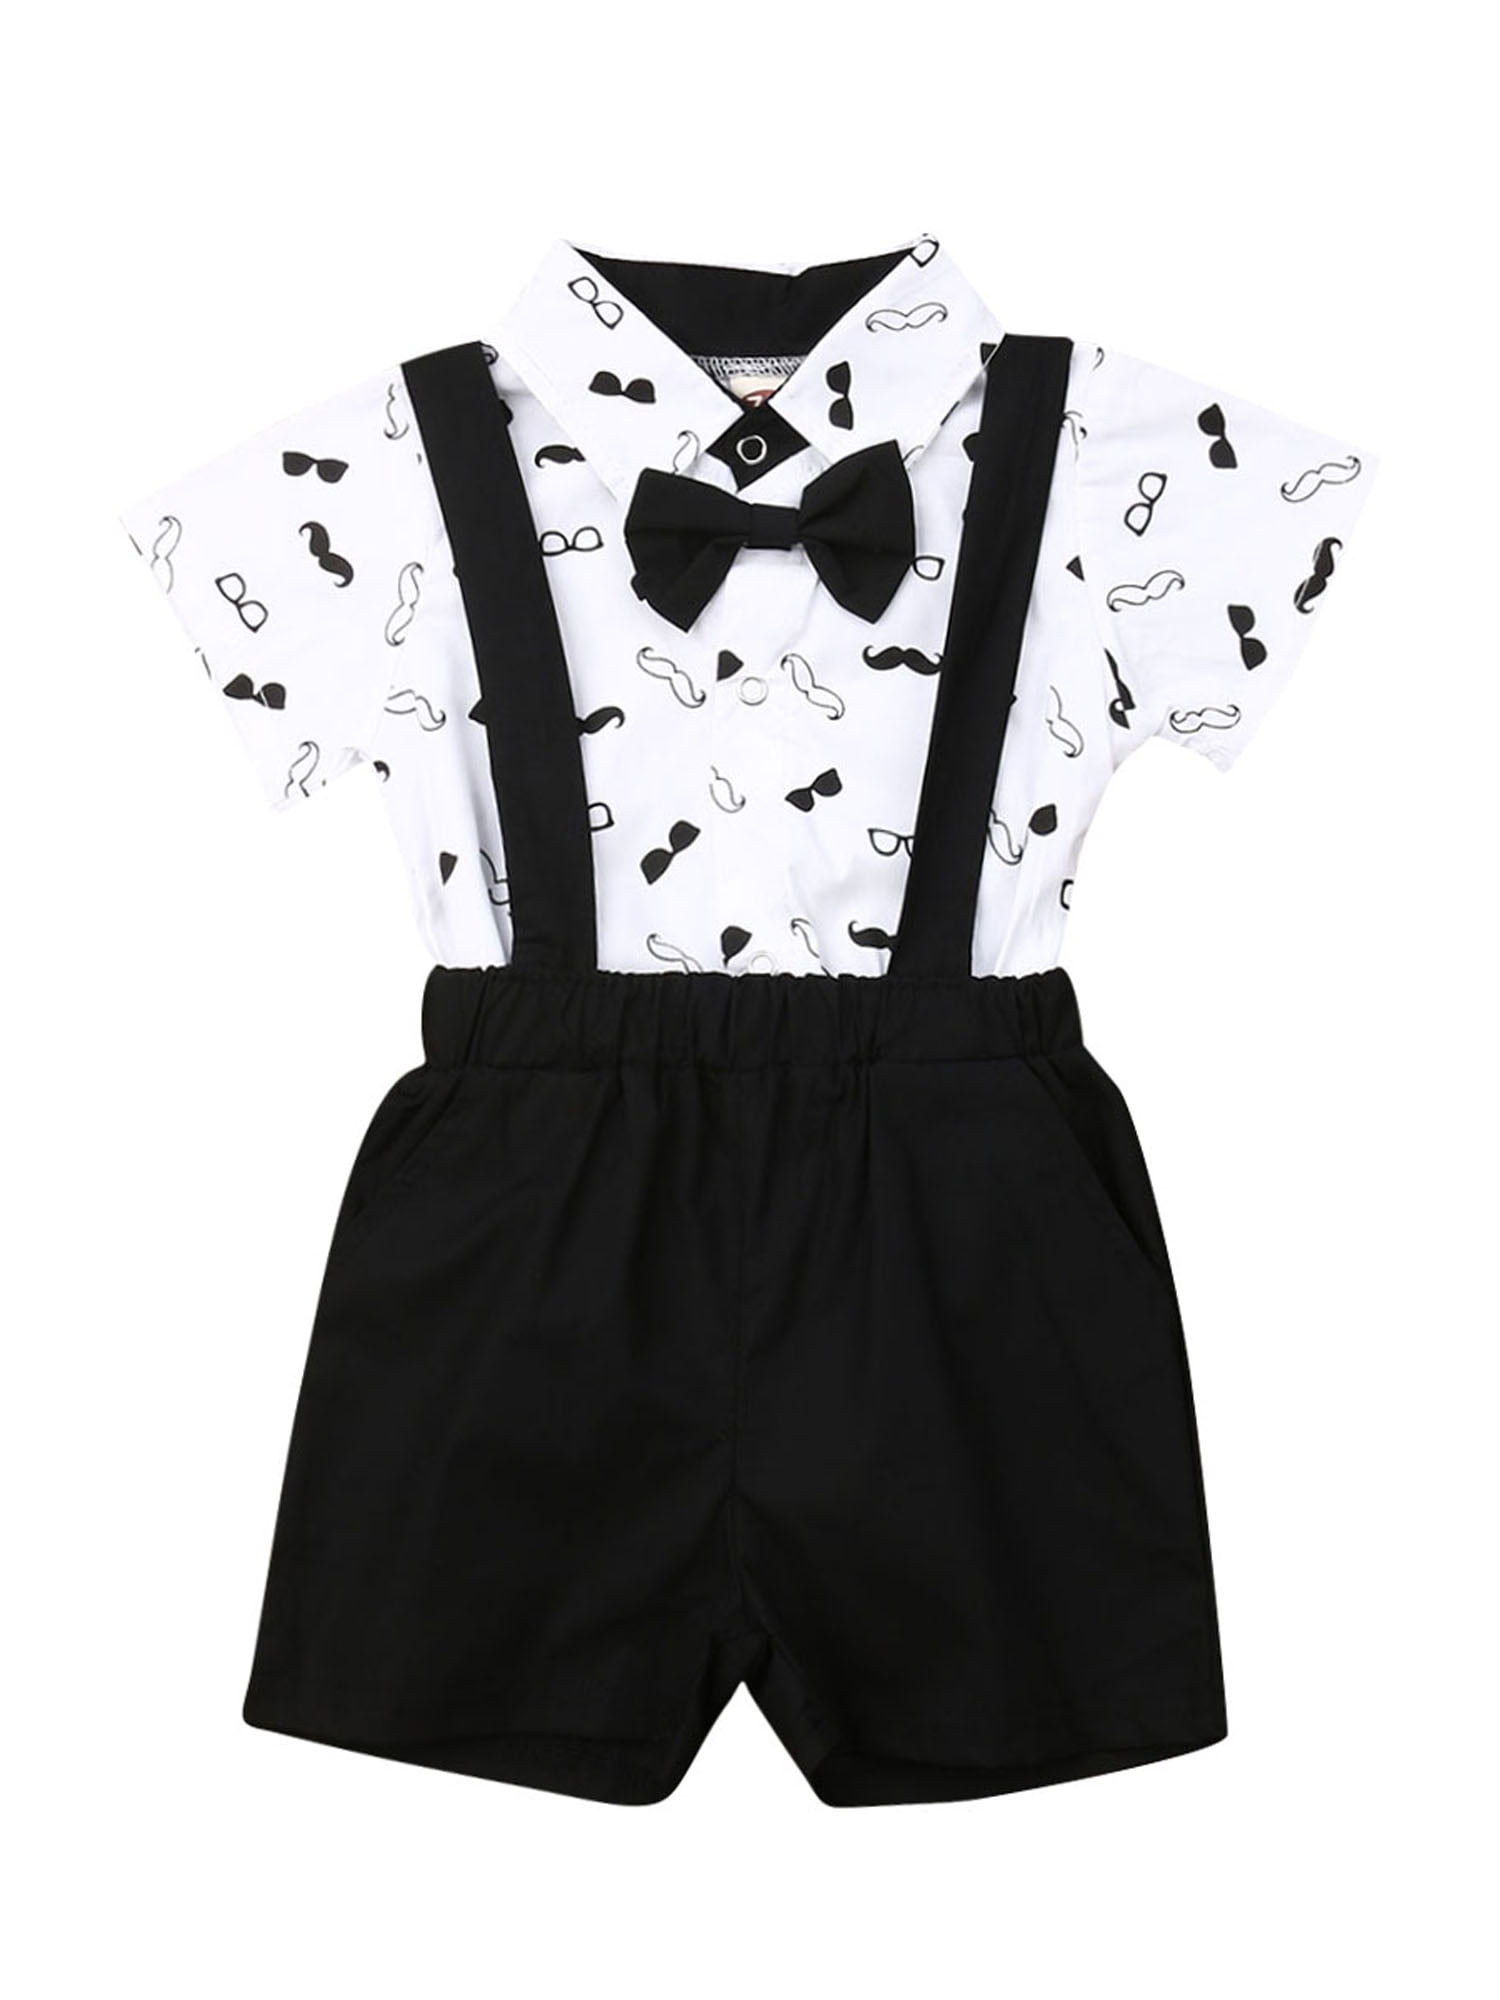 0-2 Years,SO-buts Toddler Newborn Infant Baby Boy Gentleman Suit Bow Tie Long Sleeve Romper Jumpsuit Clothes Outfits 